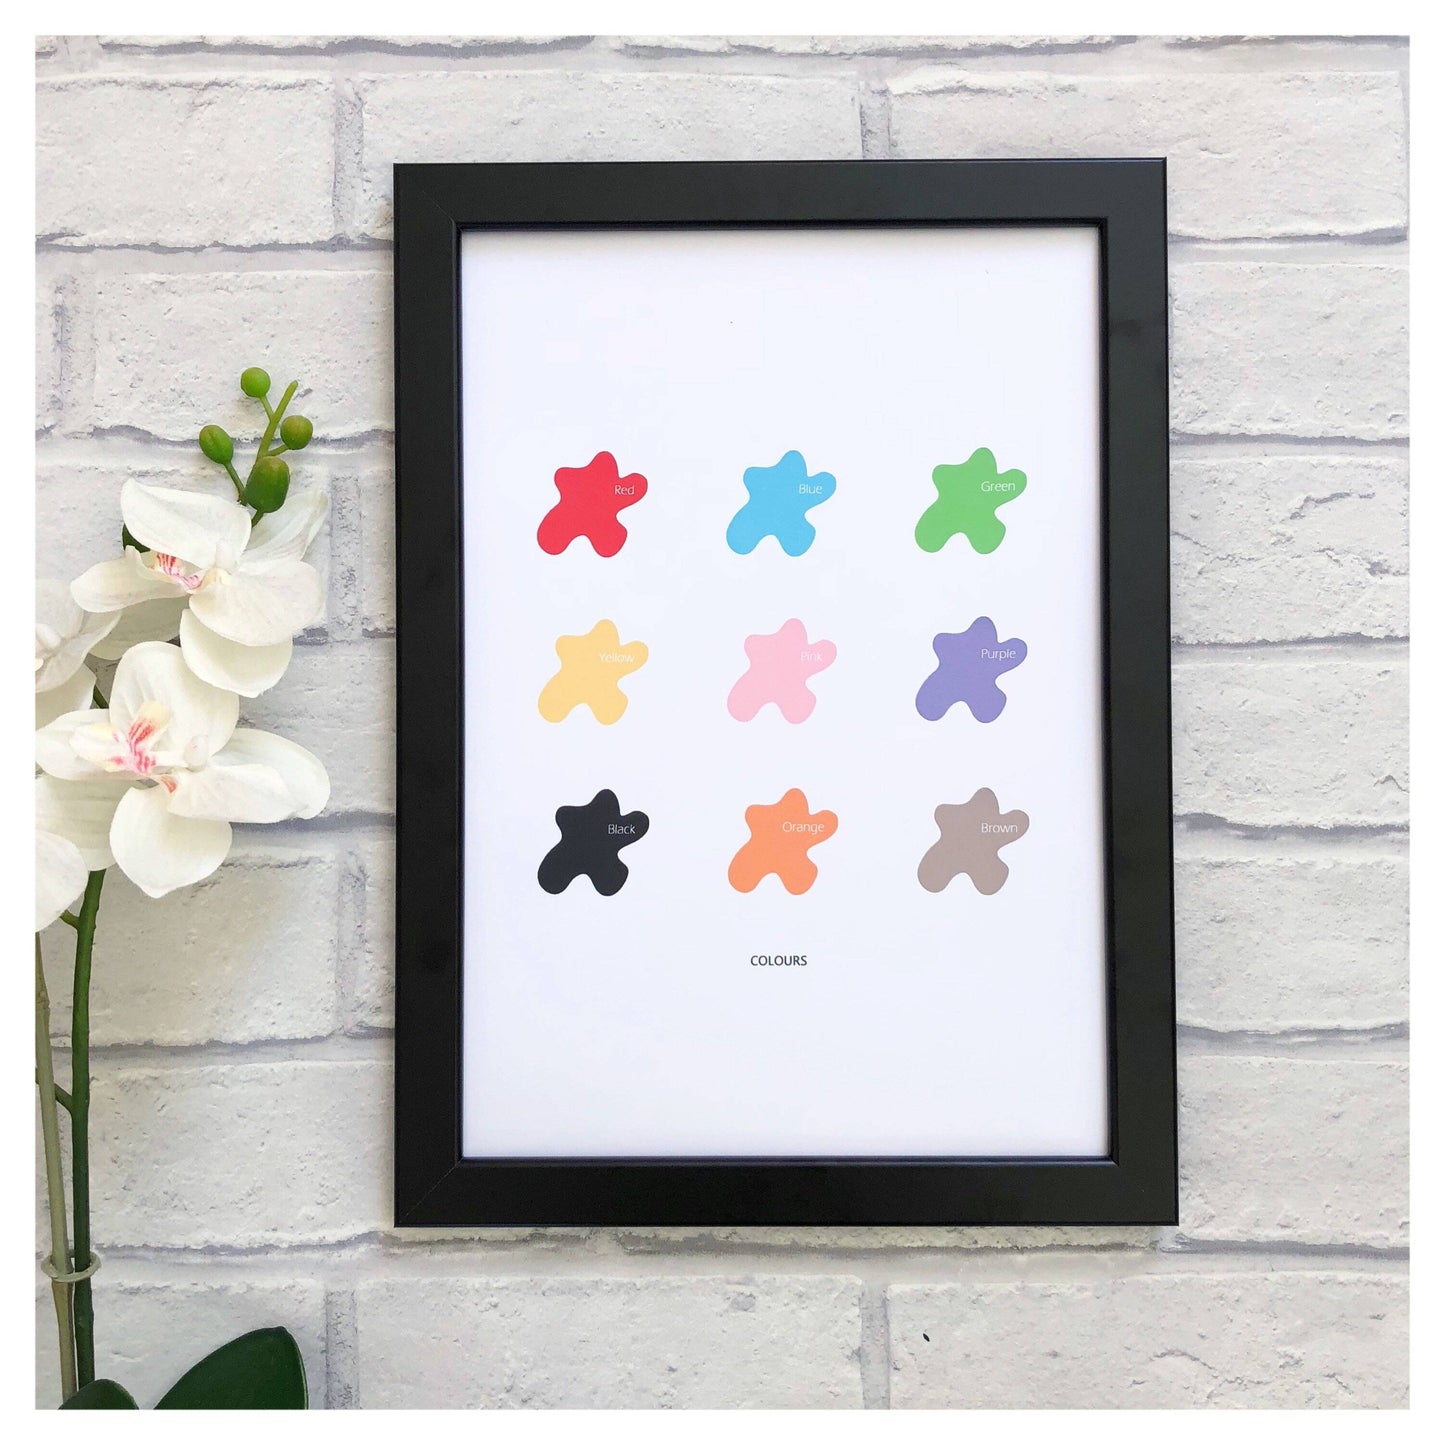 Colours Print A4-Little Boo Learning-